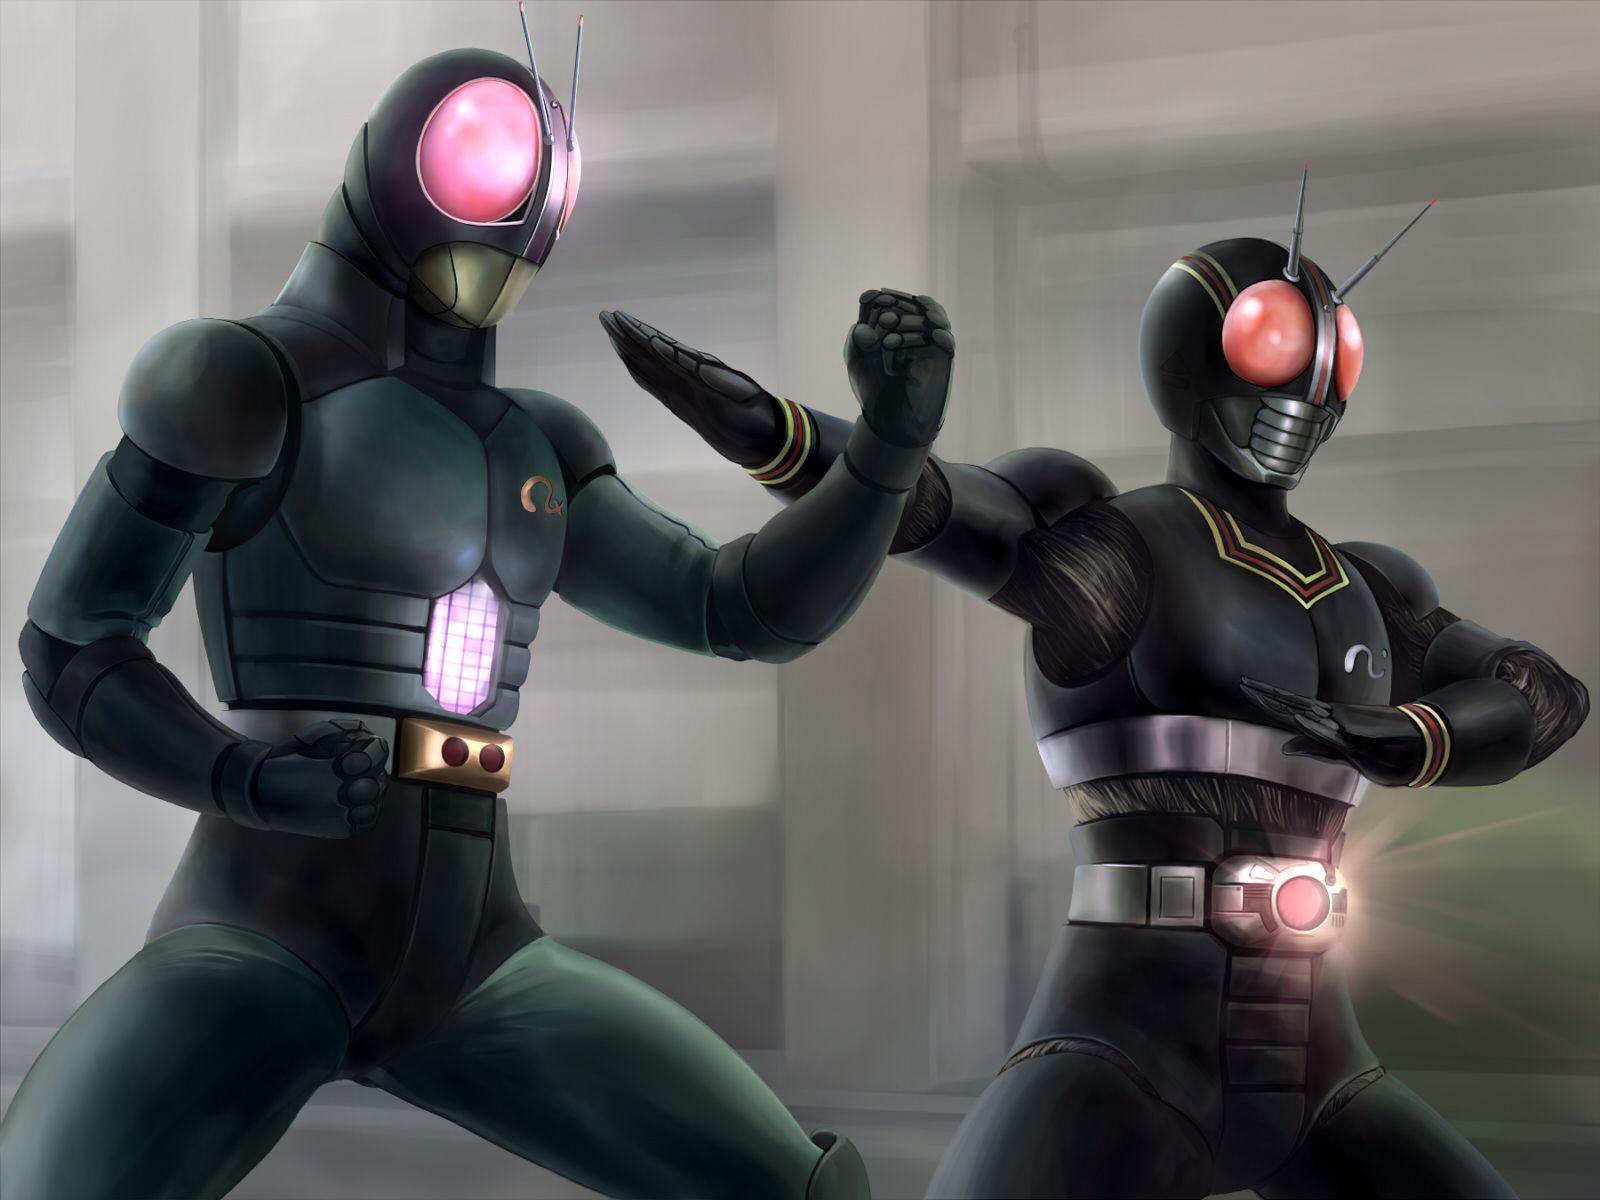 Mecha Image Of The Day Archives Kamen Rider: Black and Black RX